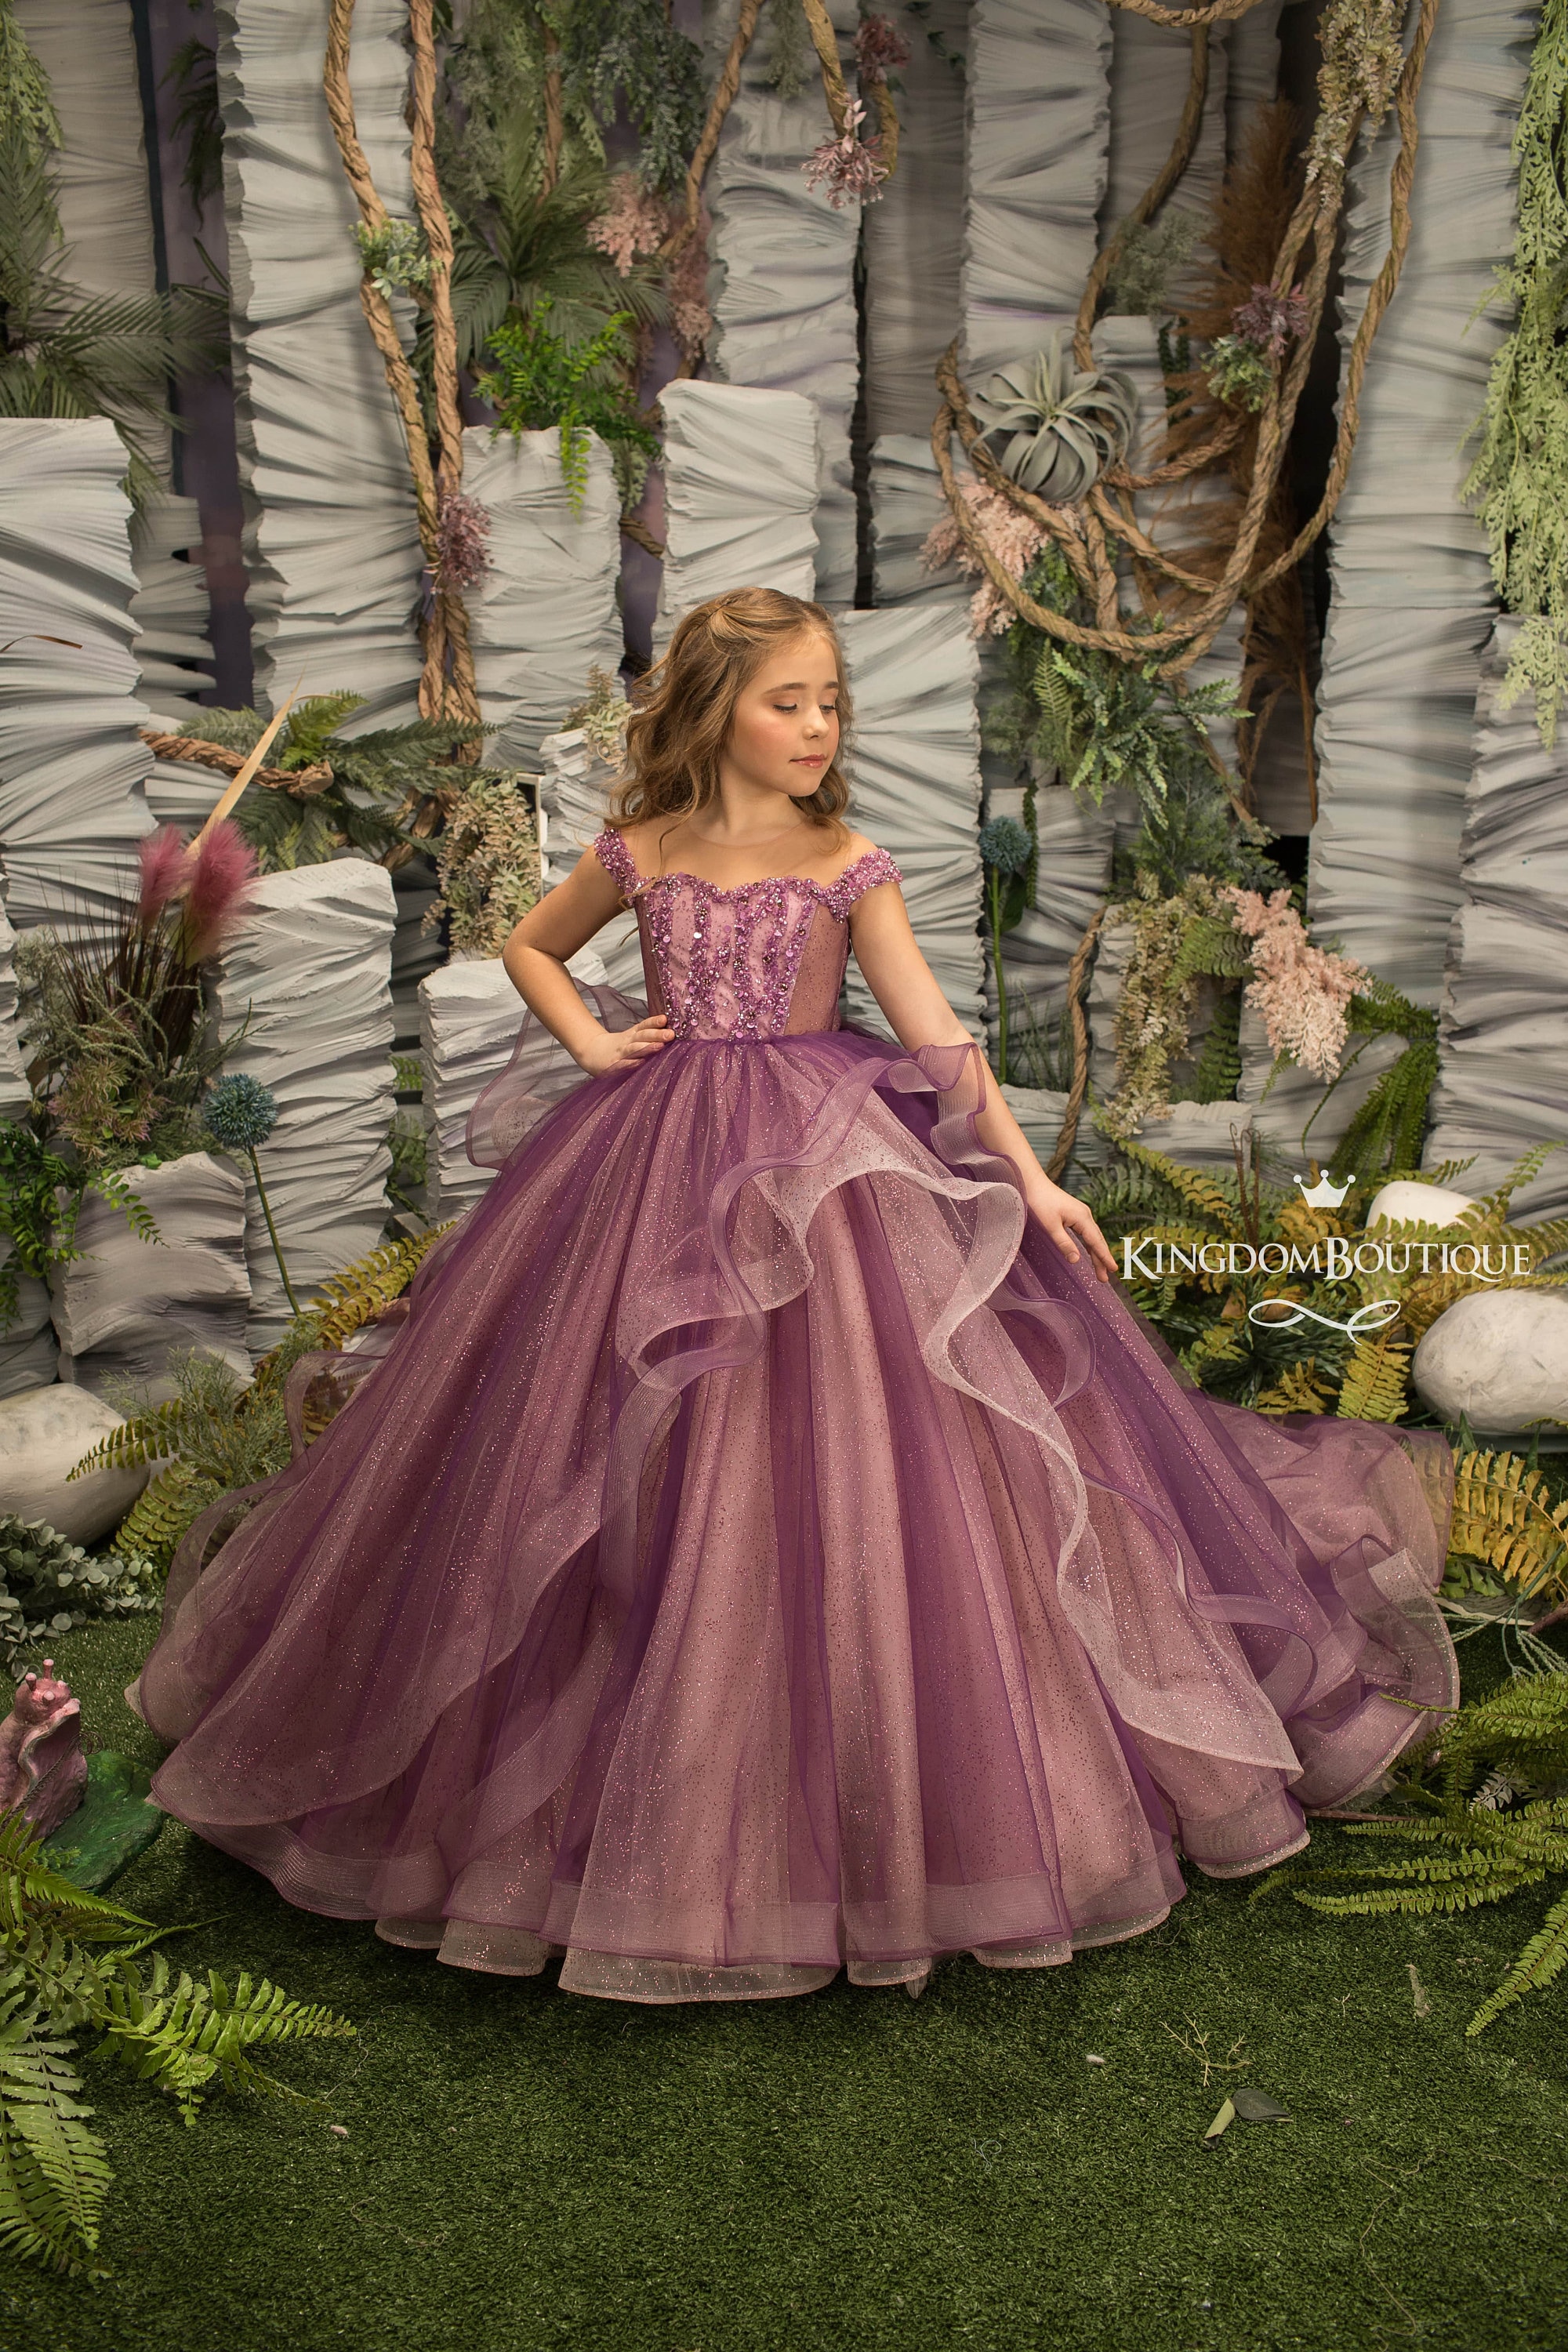 US Flower Girls Princess Dress Wedding Bridesmaid Party Pageant Ball Prom Gown 